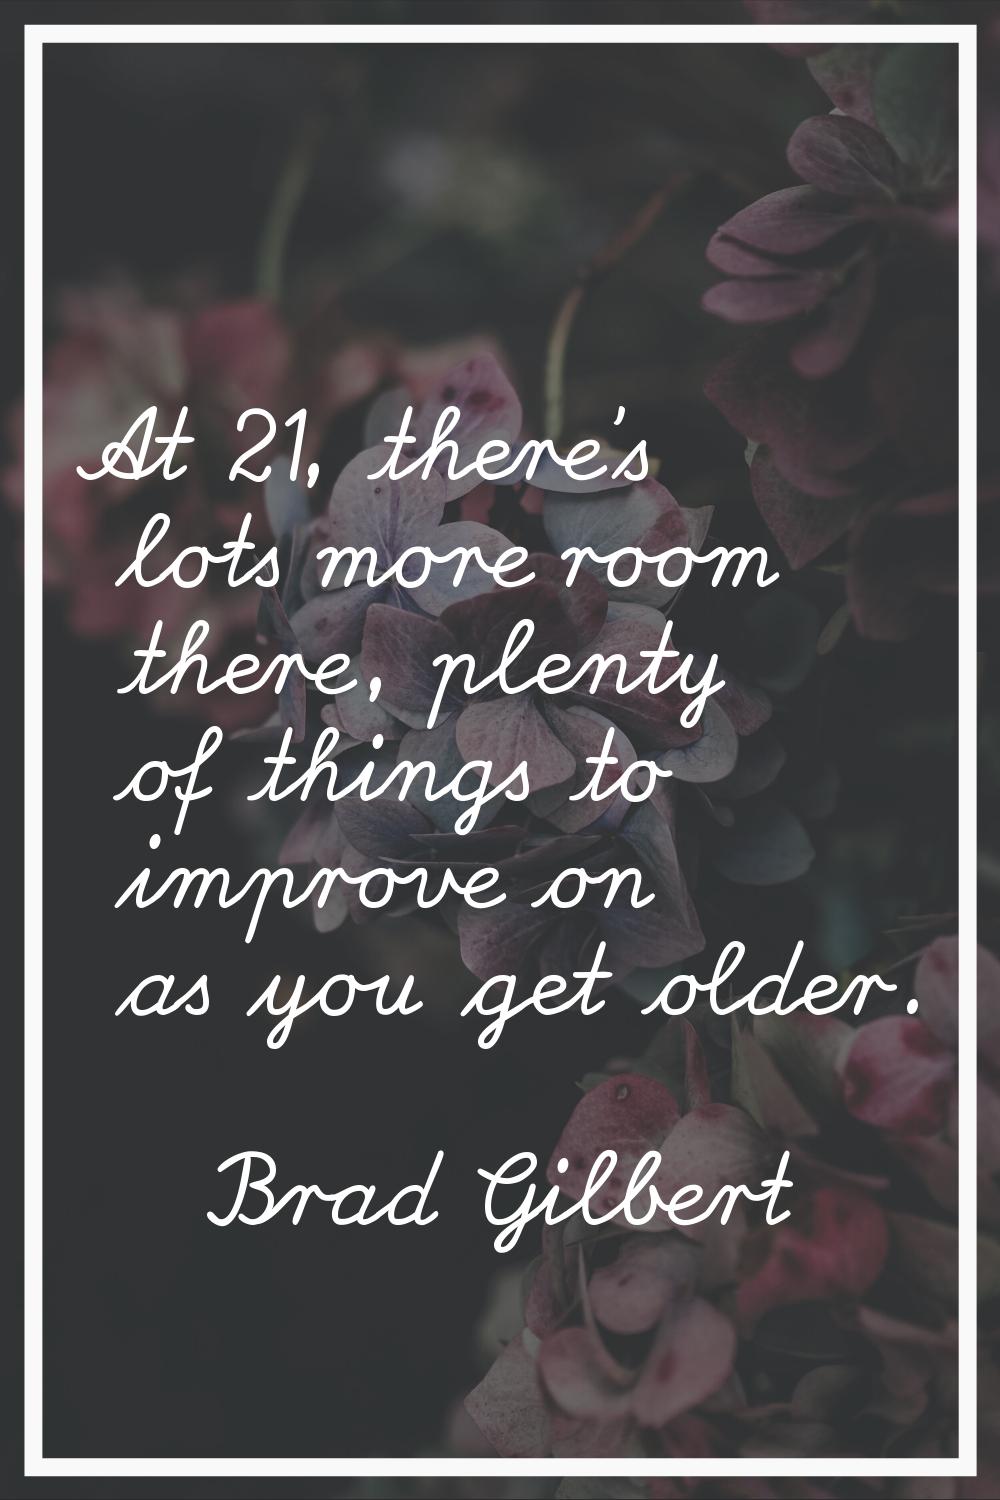 At 21, there's lots more room there, plenty of things to improve on as you get older.